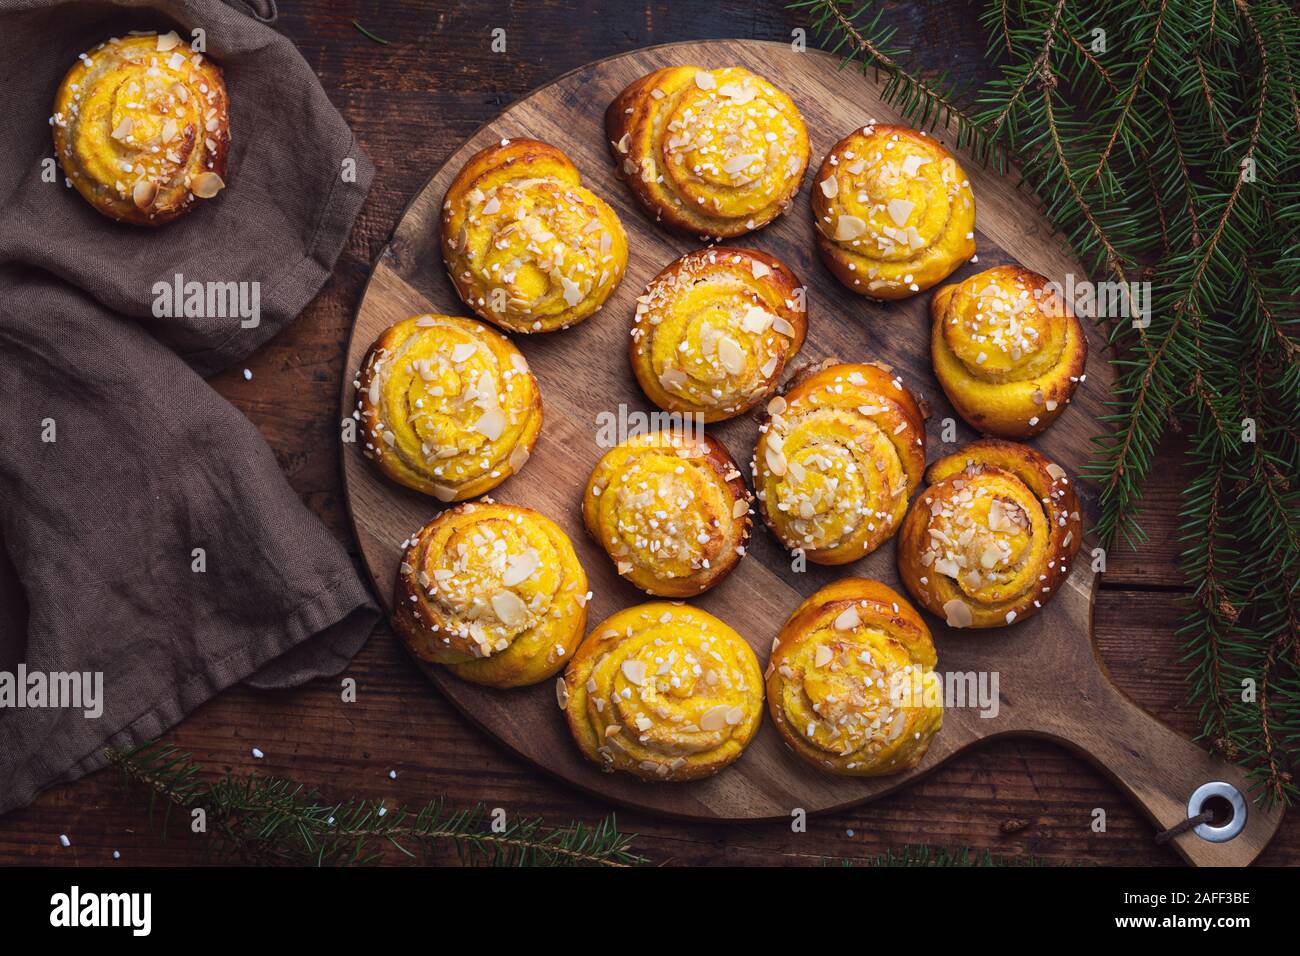 Freshly baked homemade Swedish traditional saffron buns, also known as lussebullar or saffransbröd. Seen from above flat lay on a dark wooden table su Stock Photo